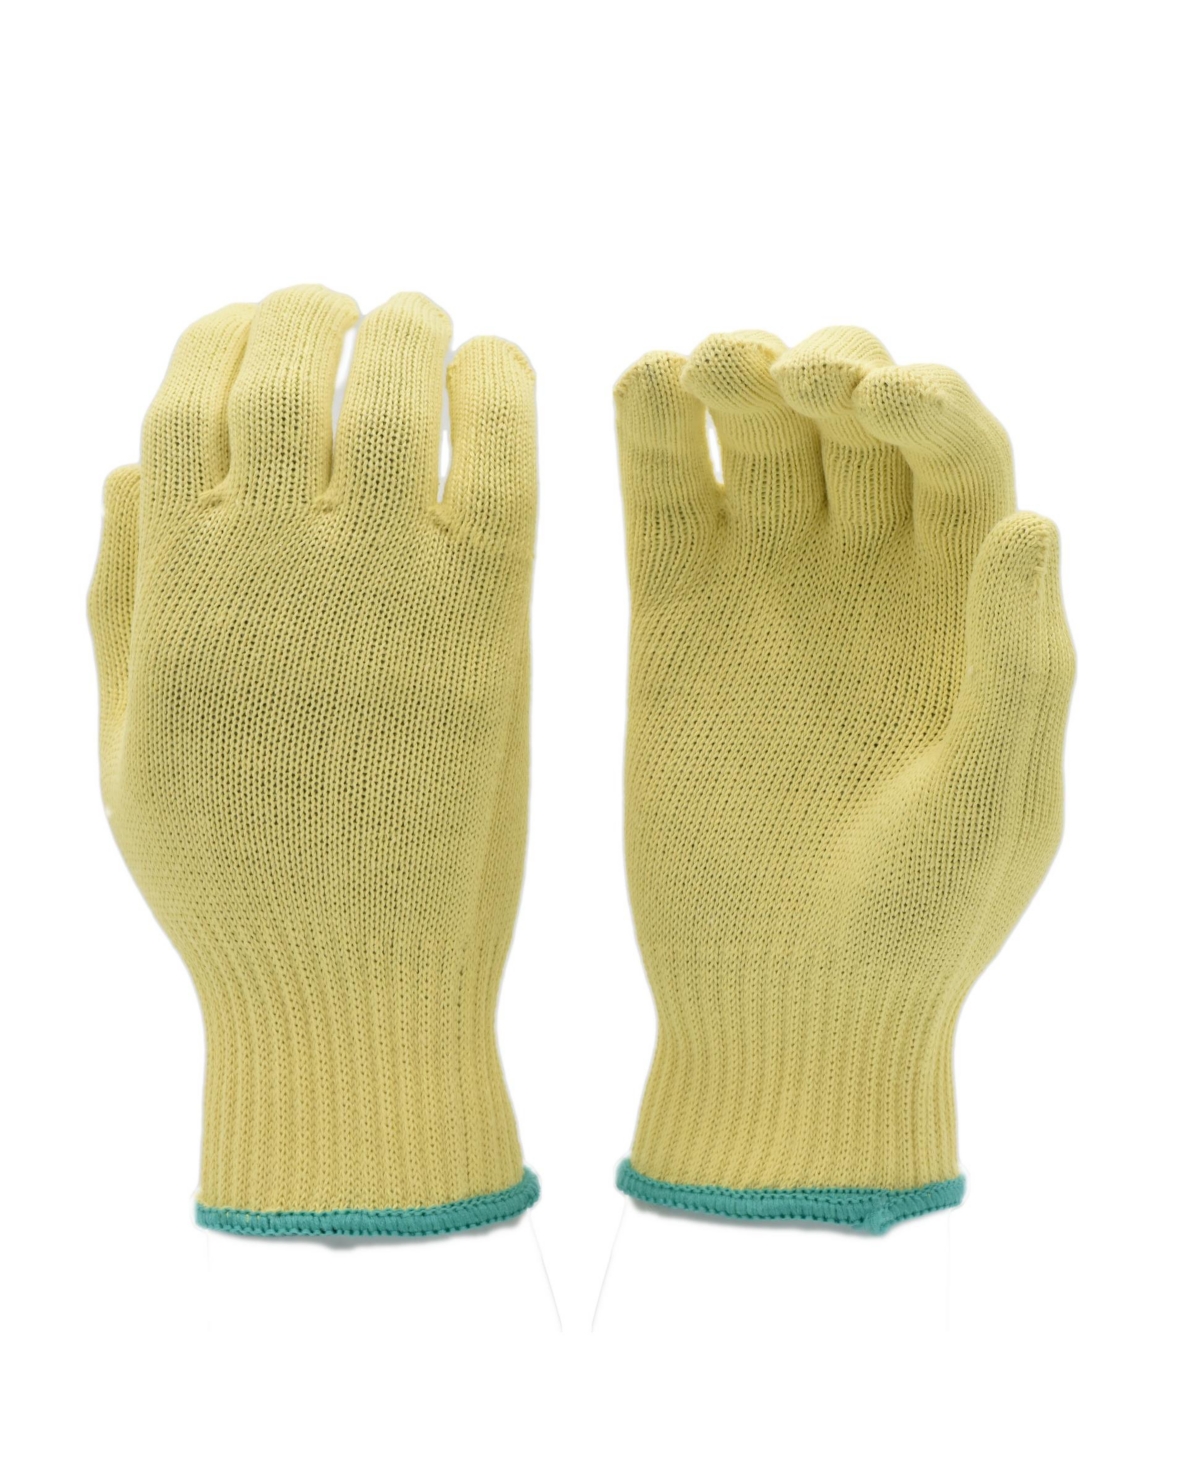 Cut Resistant Work Gloves - Yellow